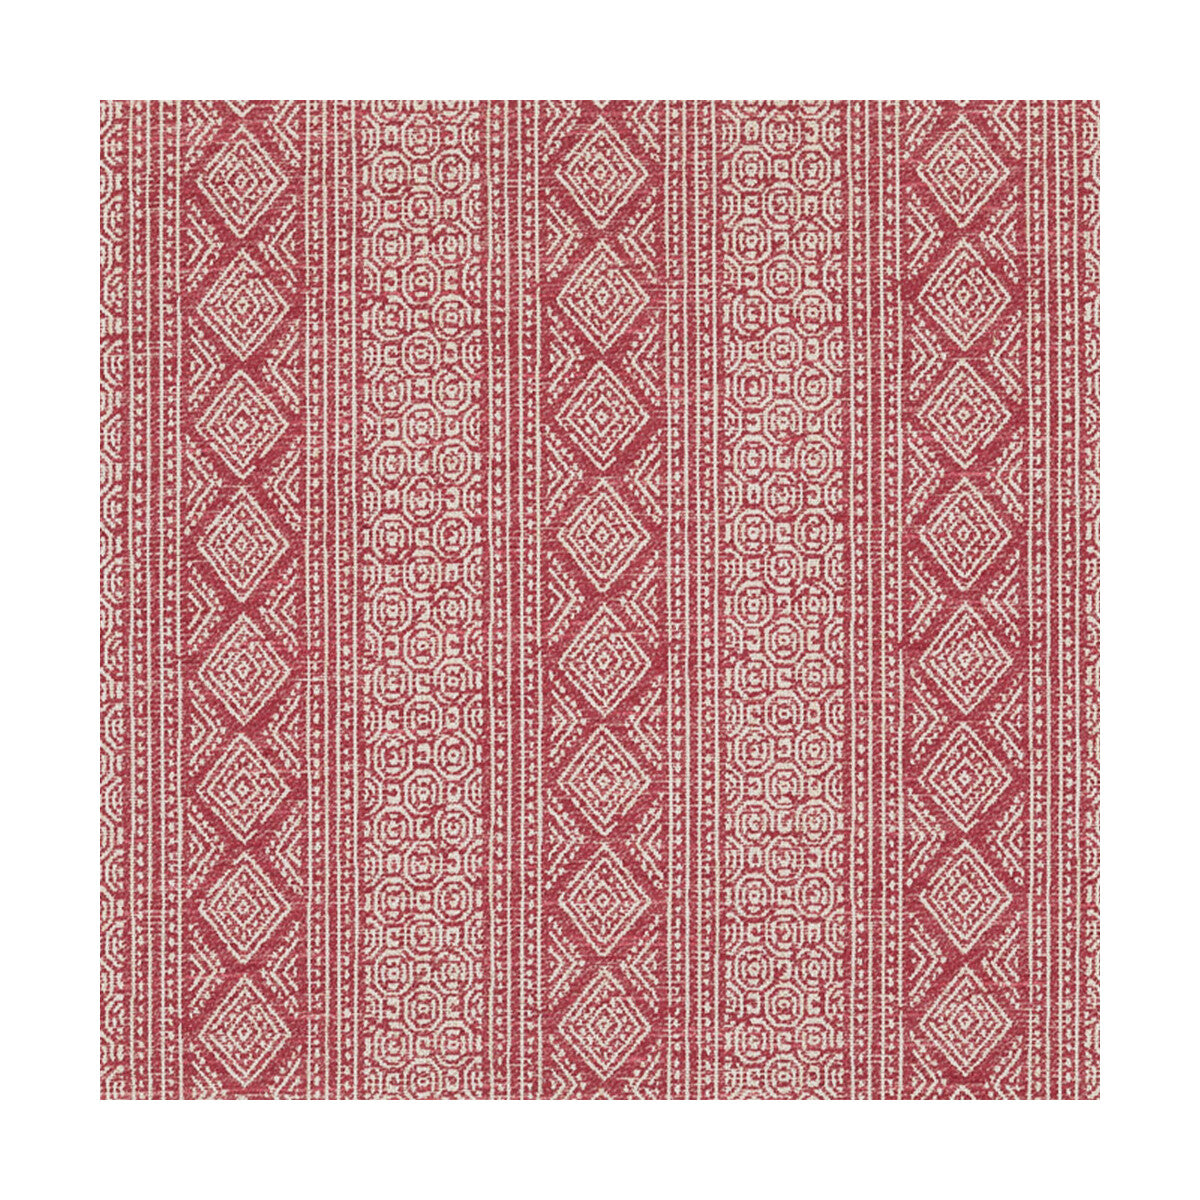 Jasper fabric in raspberry color - pattern BFC-3701.197.0 - by Lee Jofa in the Blithfield collection